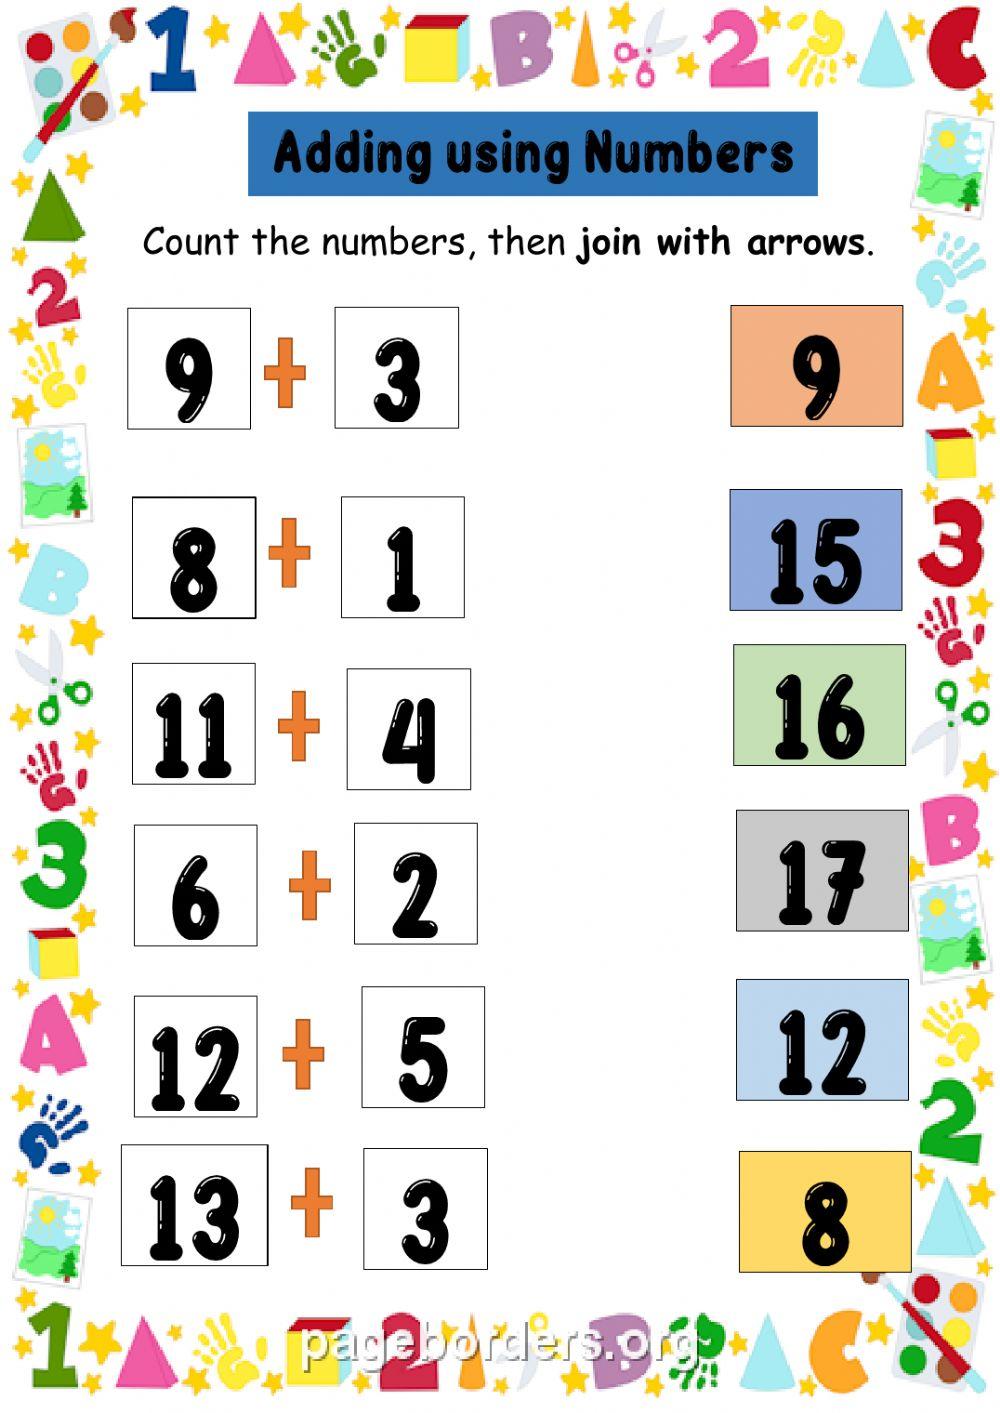 Adding using Numbers